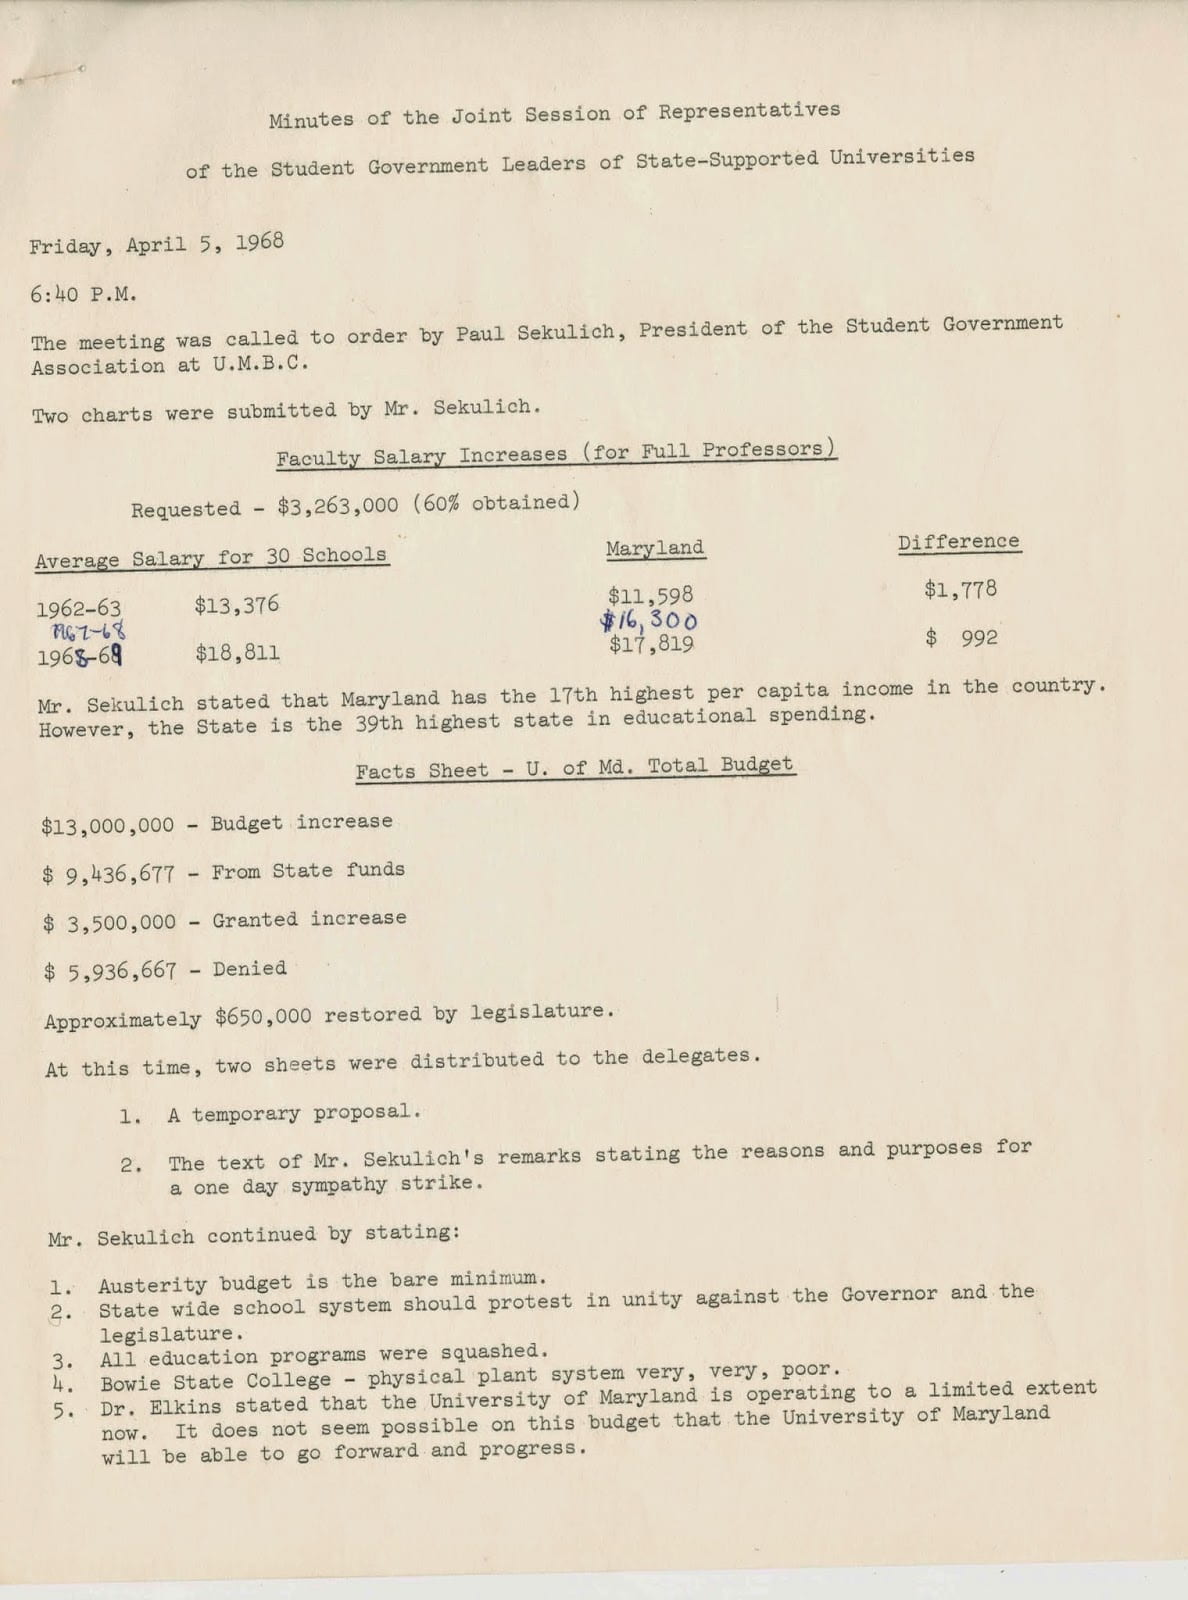 This meeting occurred the day after Martin Luther King Jr.’s assassination. The heads of student government bodies at universities in Maryland met to discuss state issues, including funding for education and actions taken by Governor Spiro Agnew at Bowie State. Page 1.